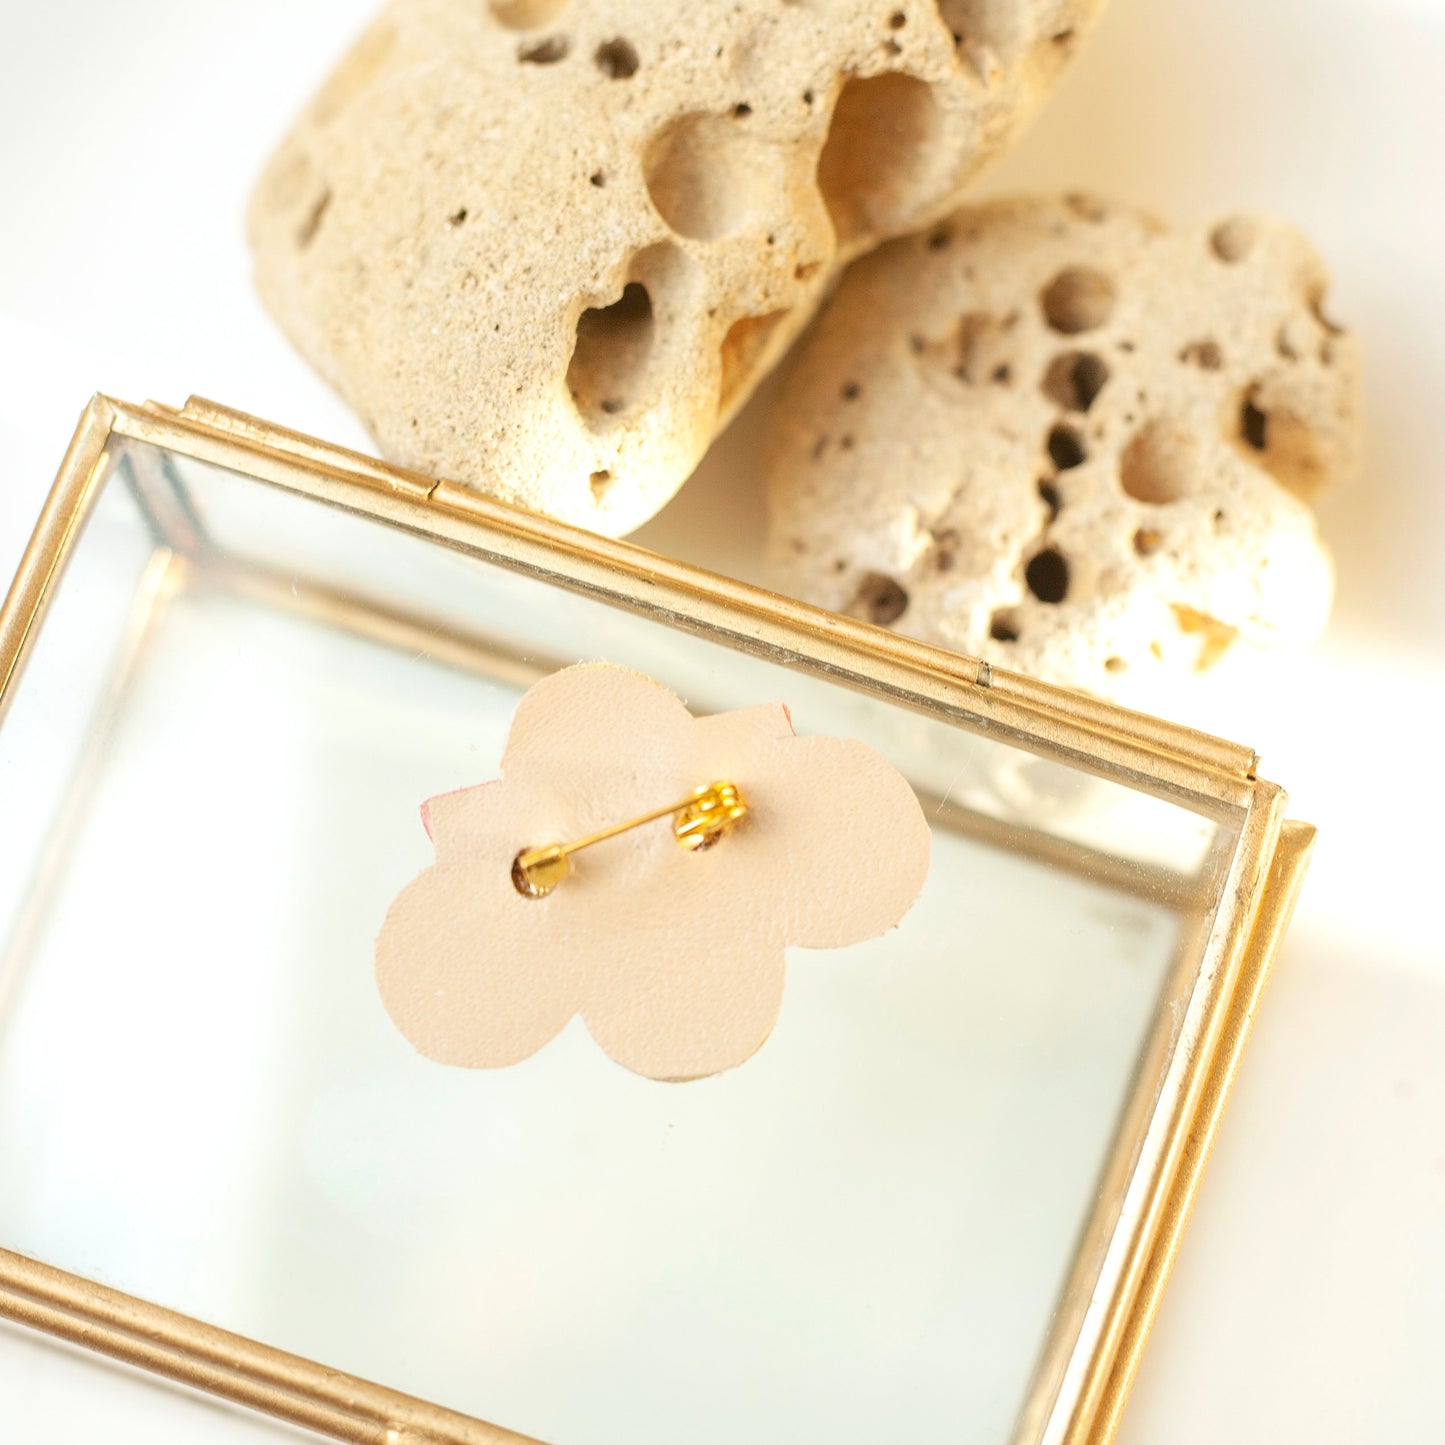 Flower brooch in pink, beige and gold leather